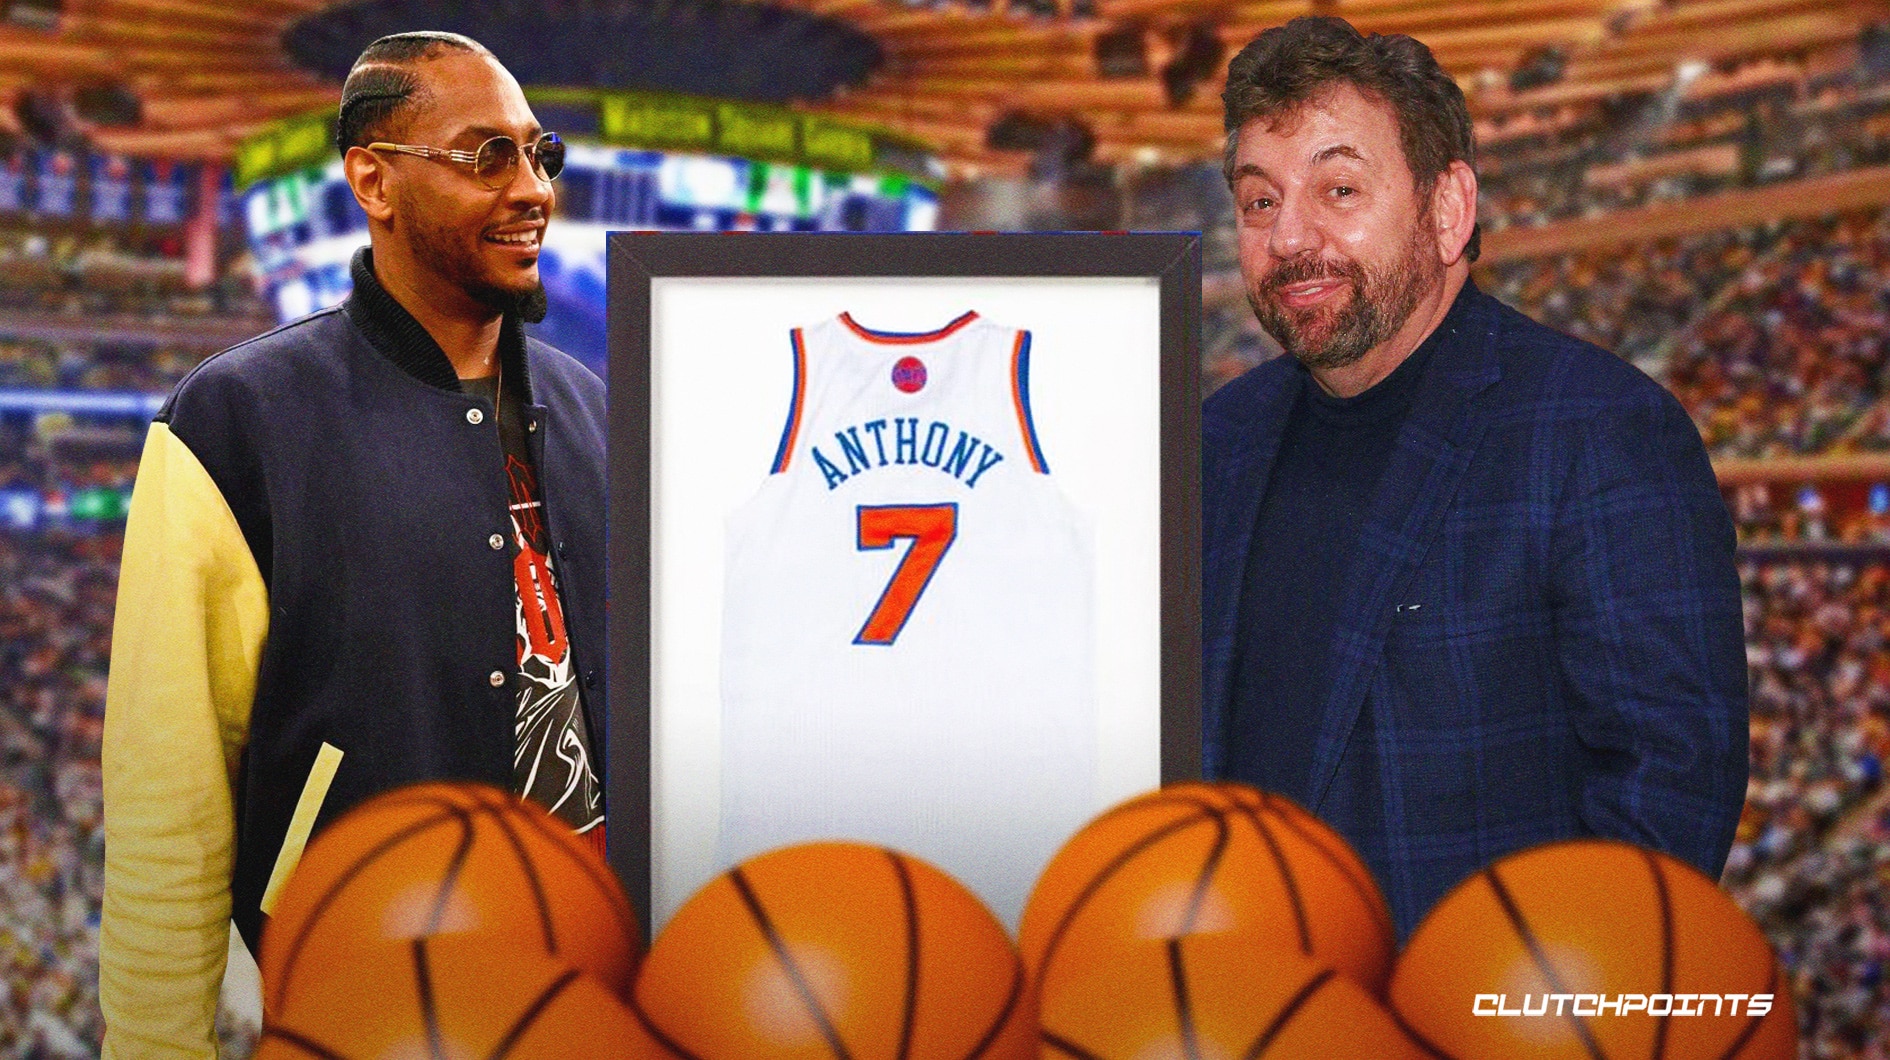 2 reasons why the Knicks must not retire Carmelo Anthony's No. 7 jersey